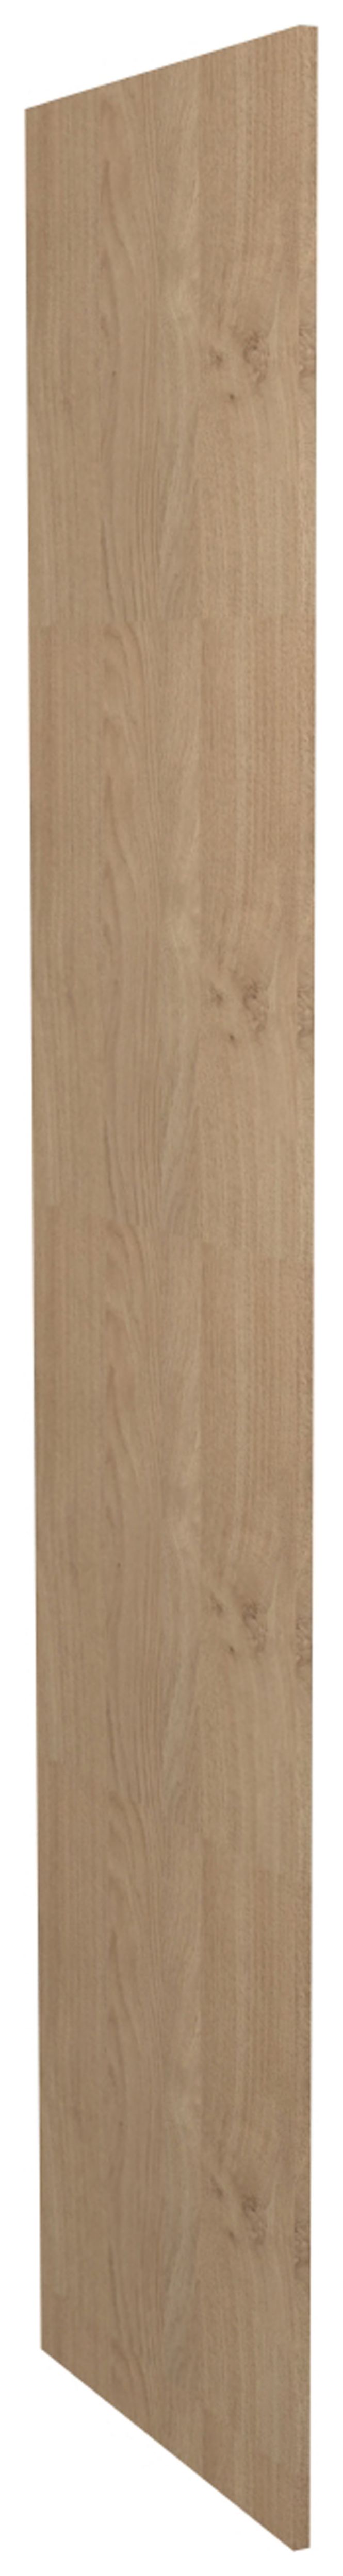 Image of Wickes Vienna Oak Tower Decor End Panel - 18mm